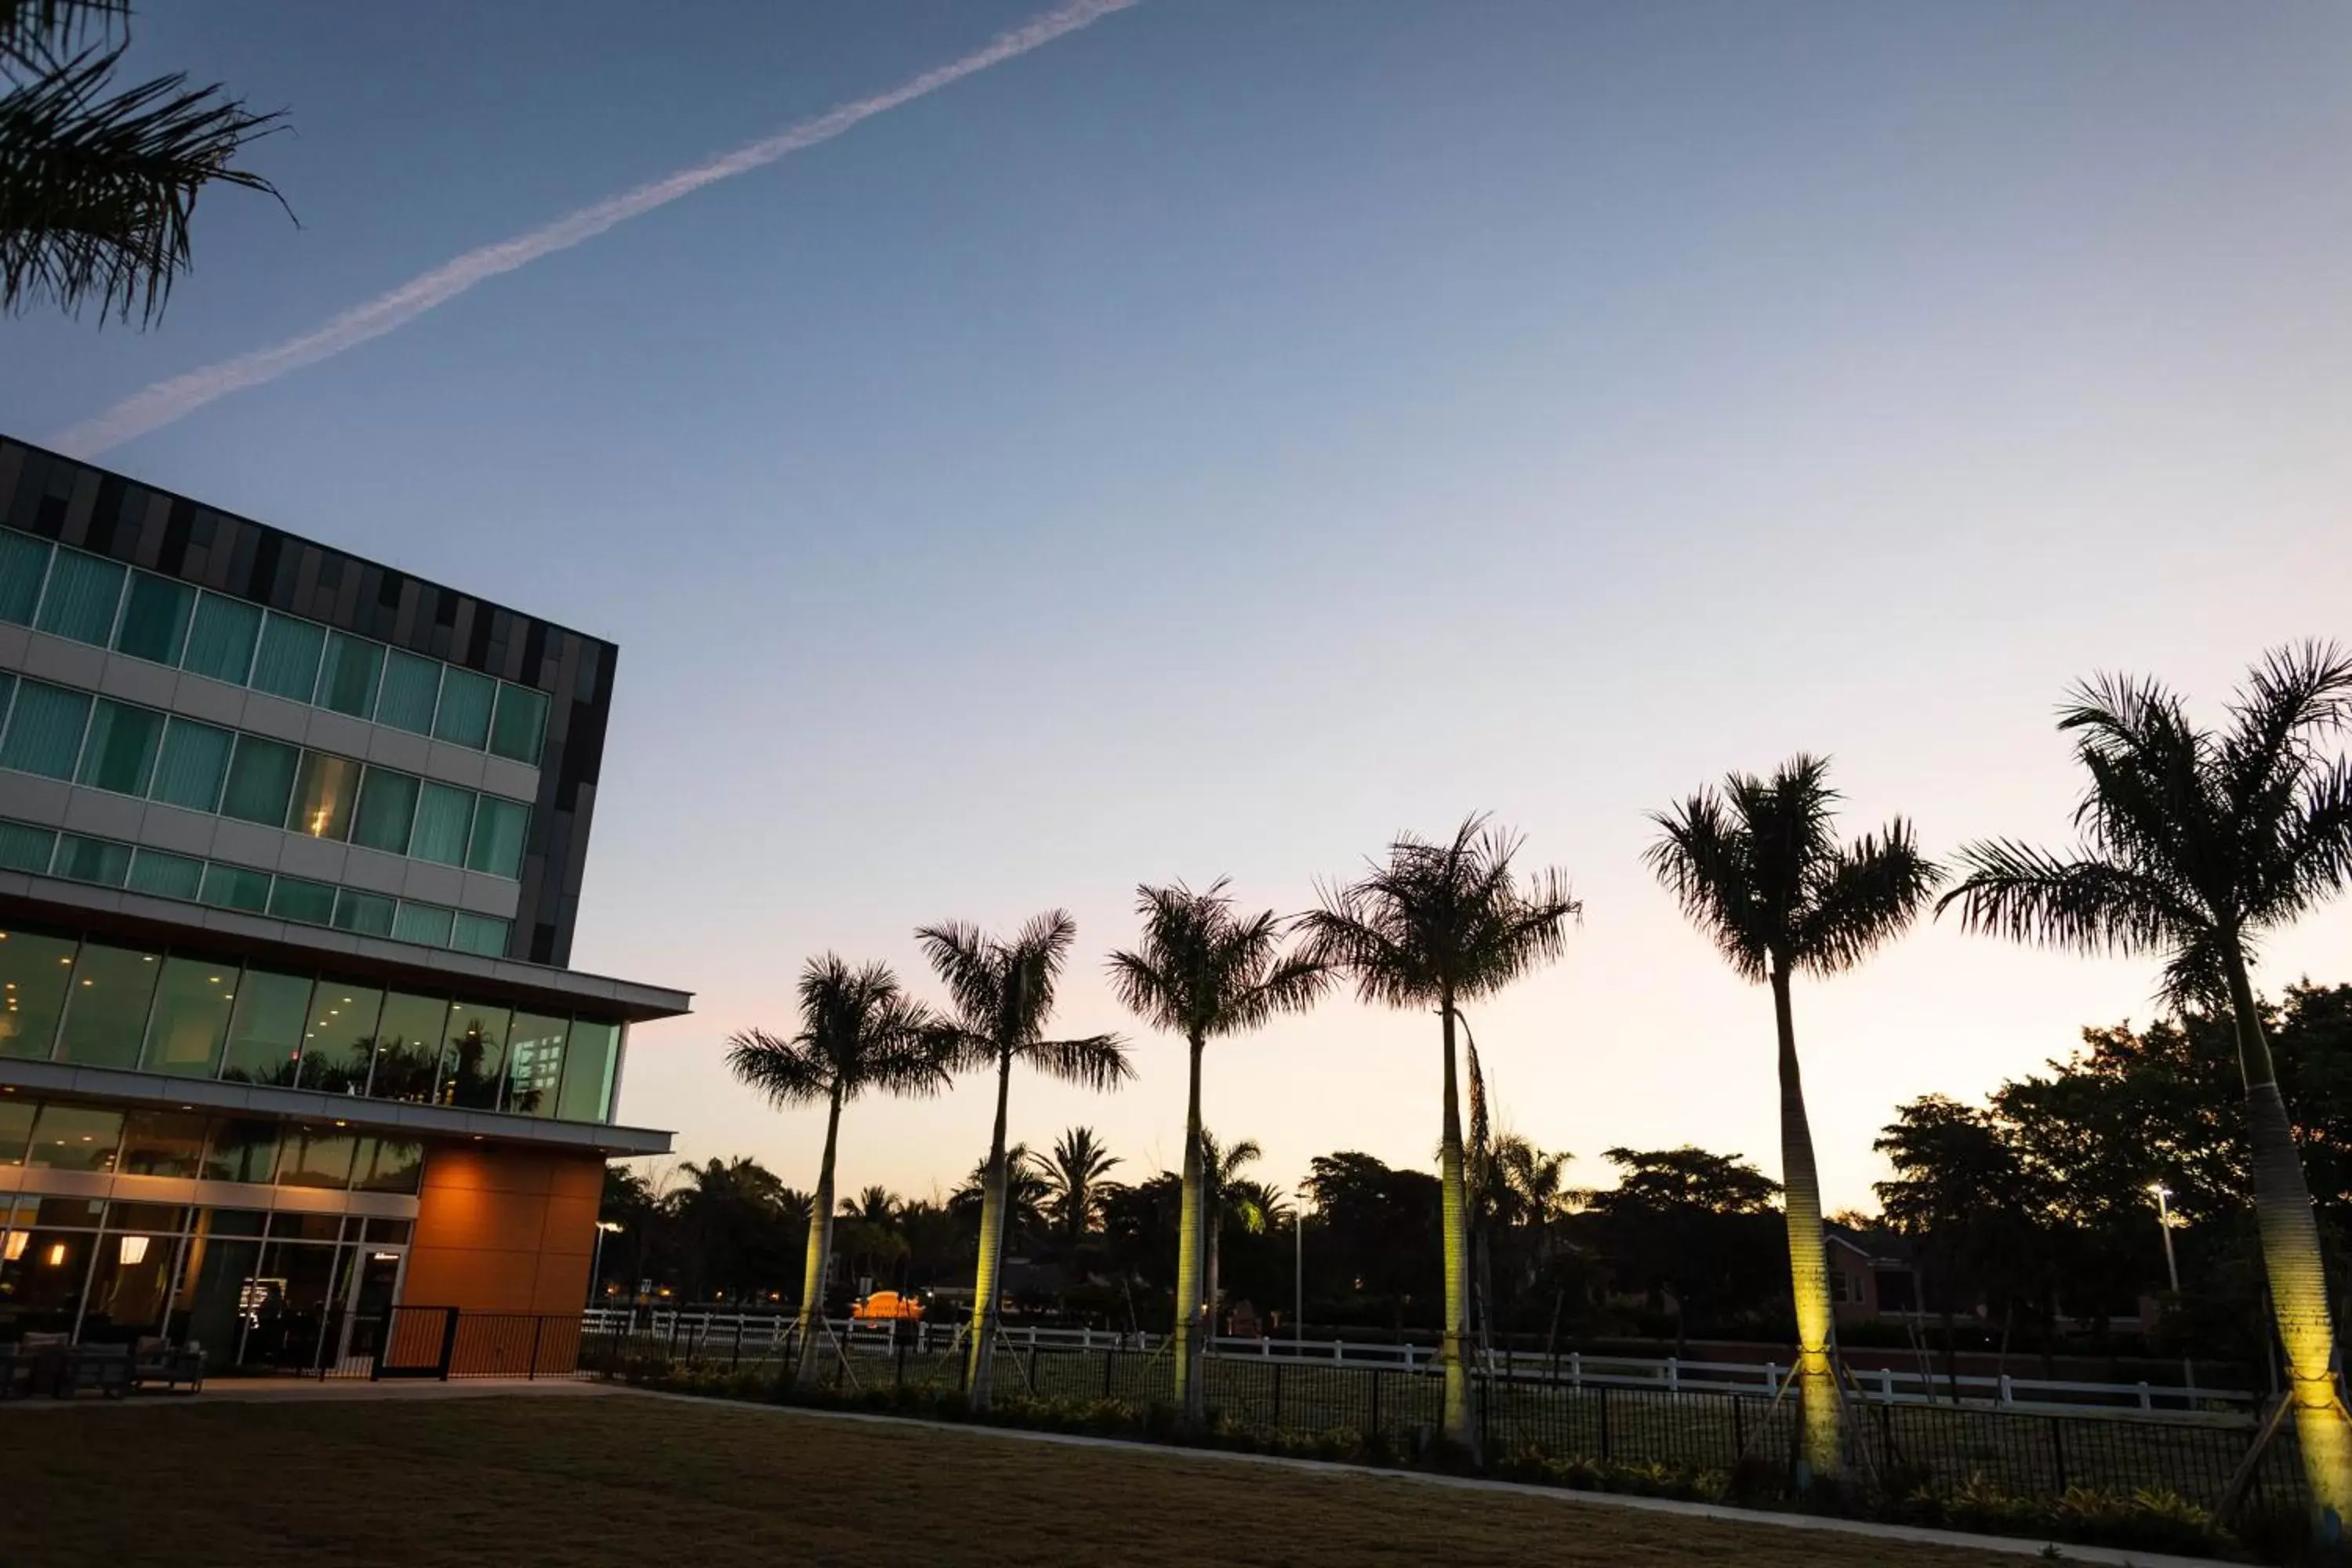 Property building, Sunrise/Sunset in Legacy Hotel at IMG Academy